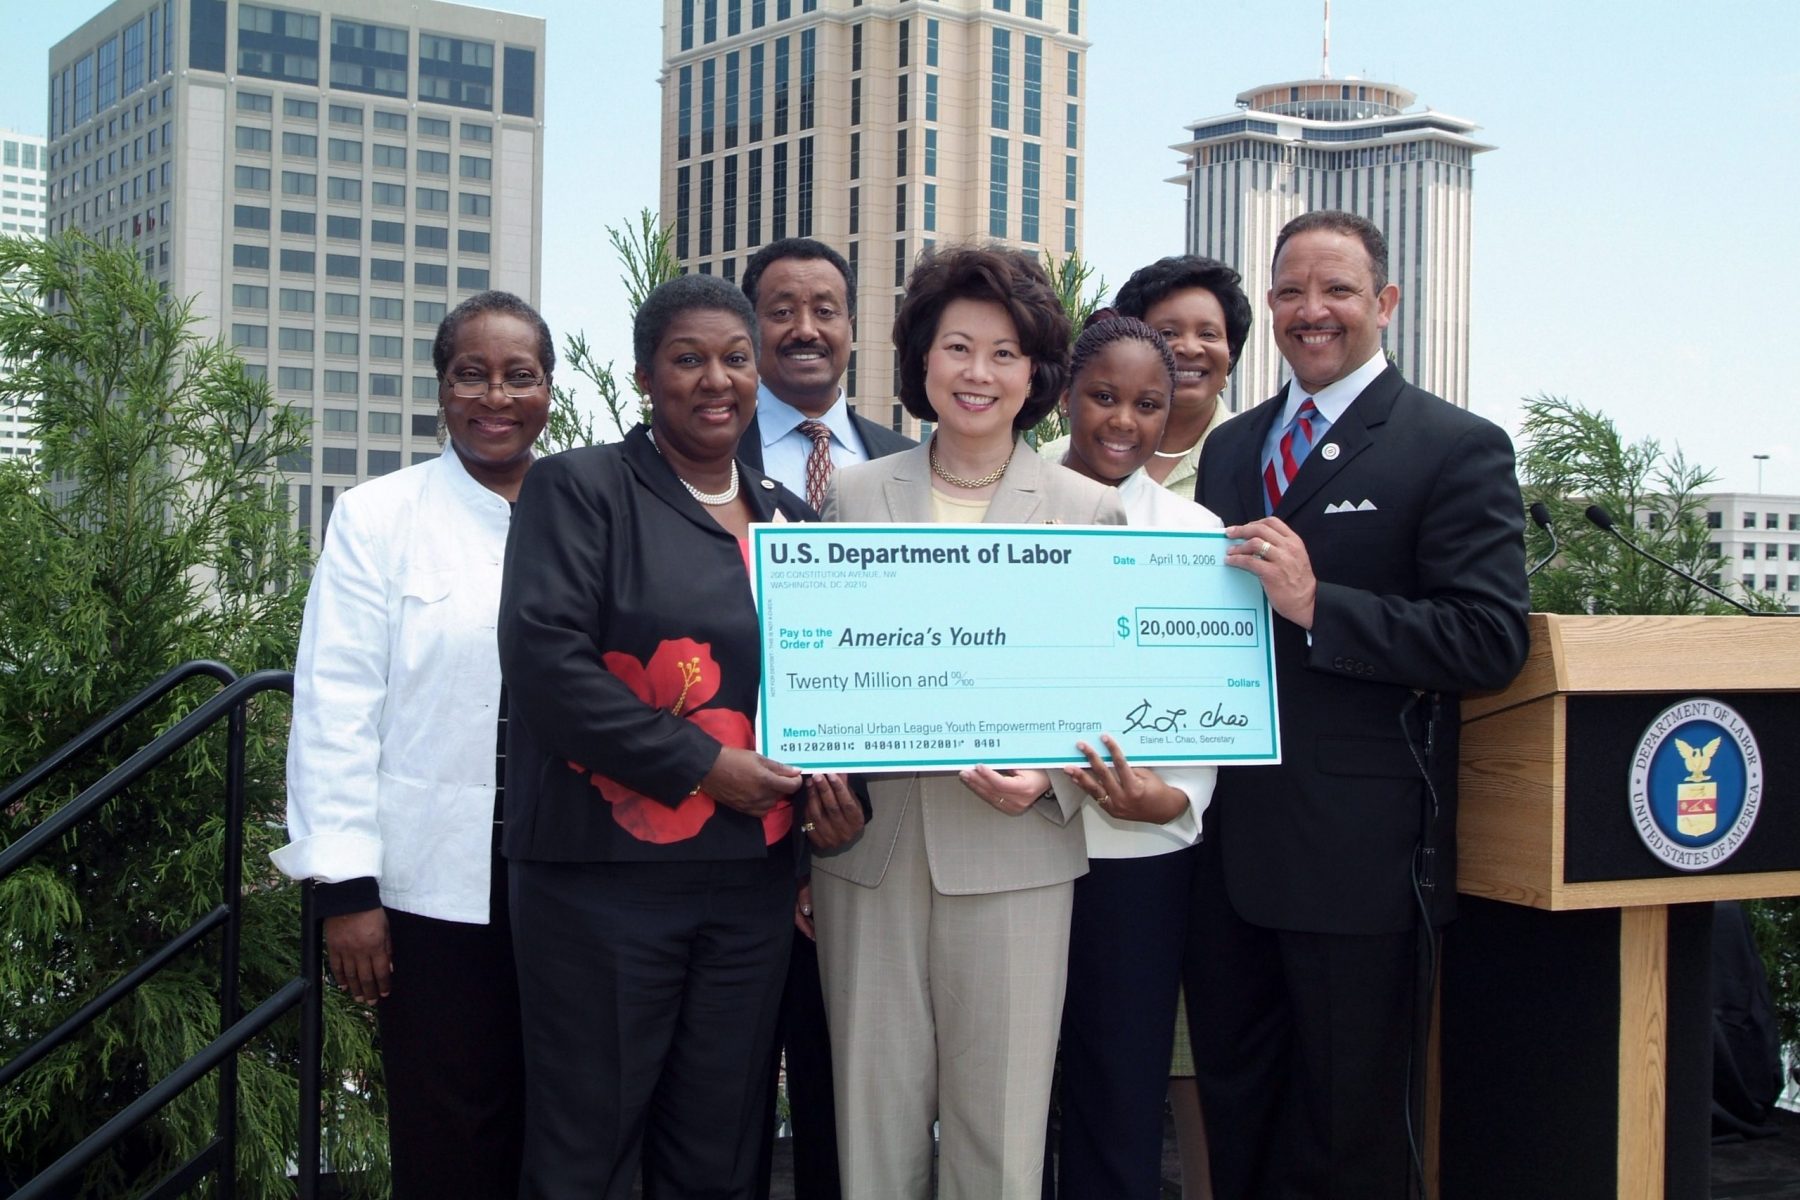 Secretary Elaine Chao presents a $20 million grant to the National Urban League in the aftermath of Hurricane Katrina. New Orleans, LA. 